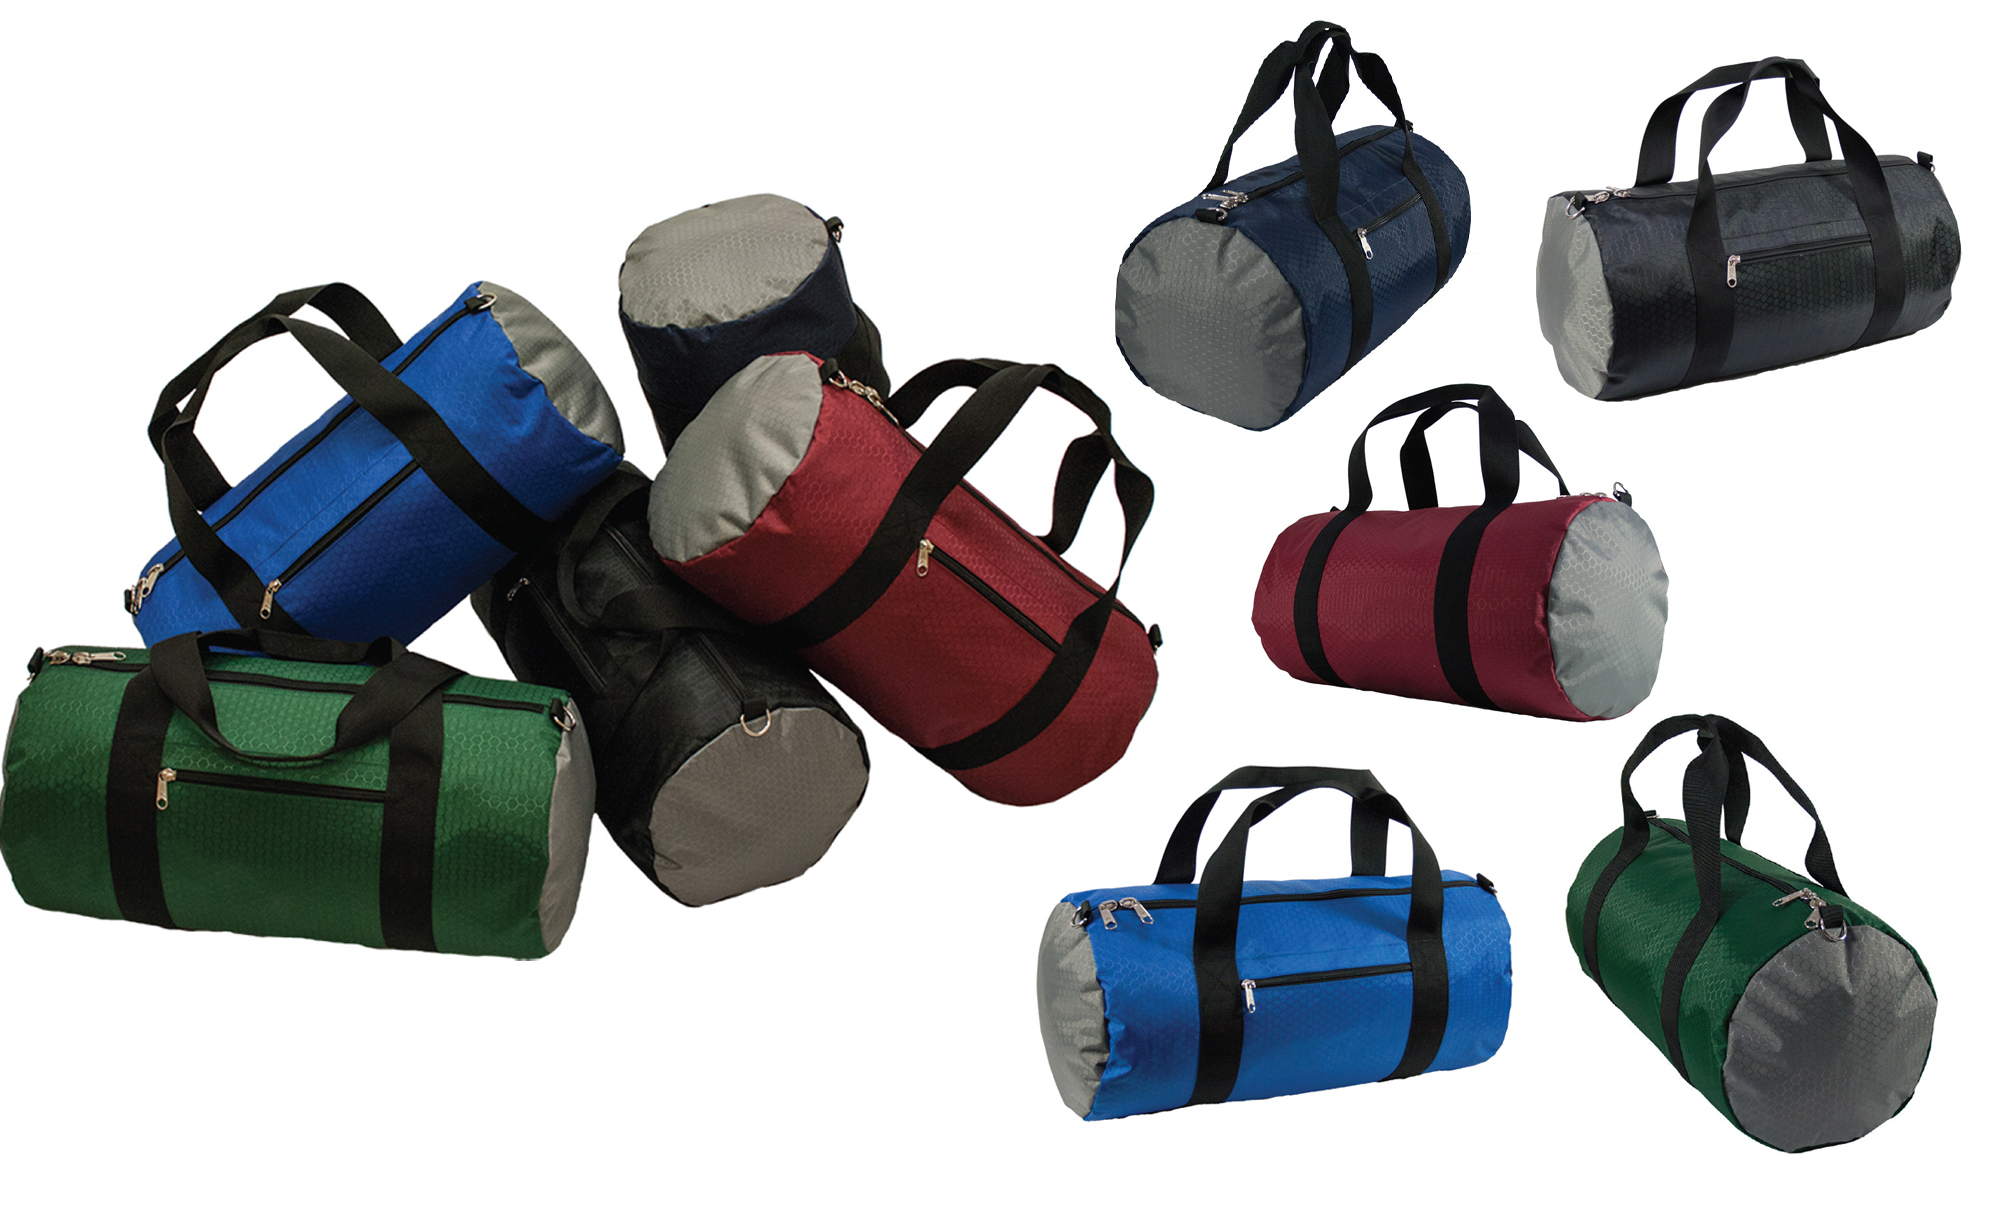 ''40'''' Round Travel DUFFLE BAGs - Choose Your Color(s)''